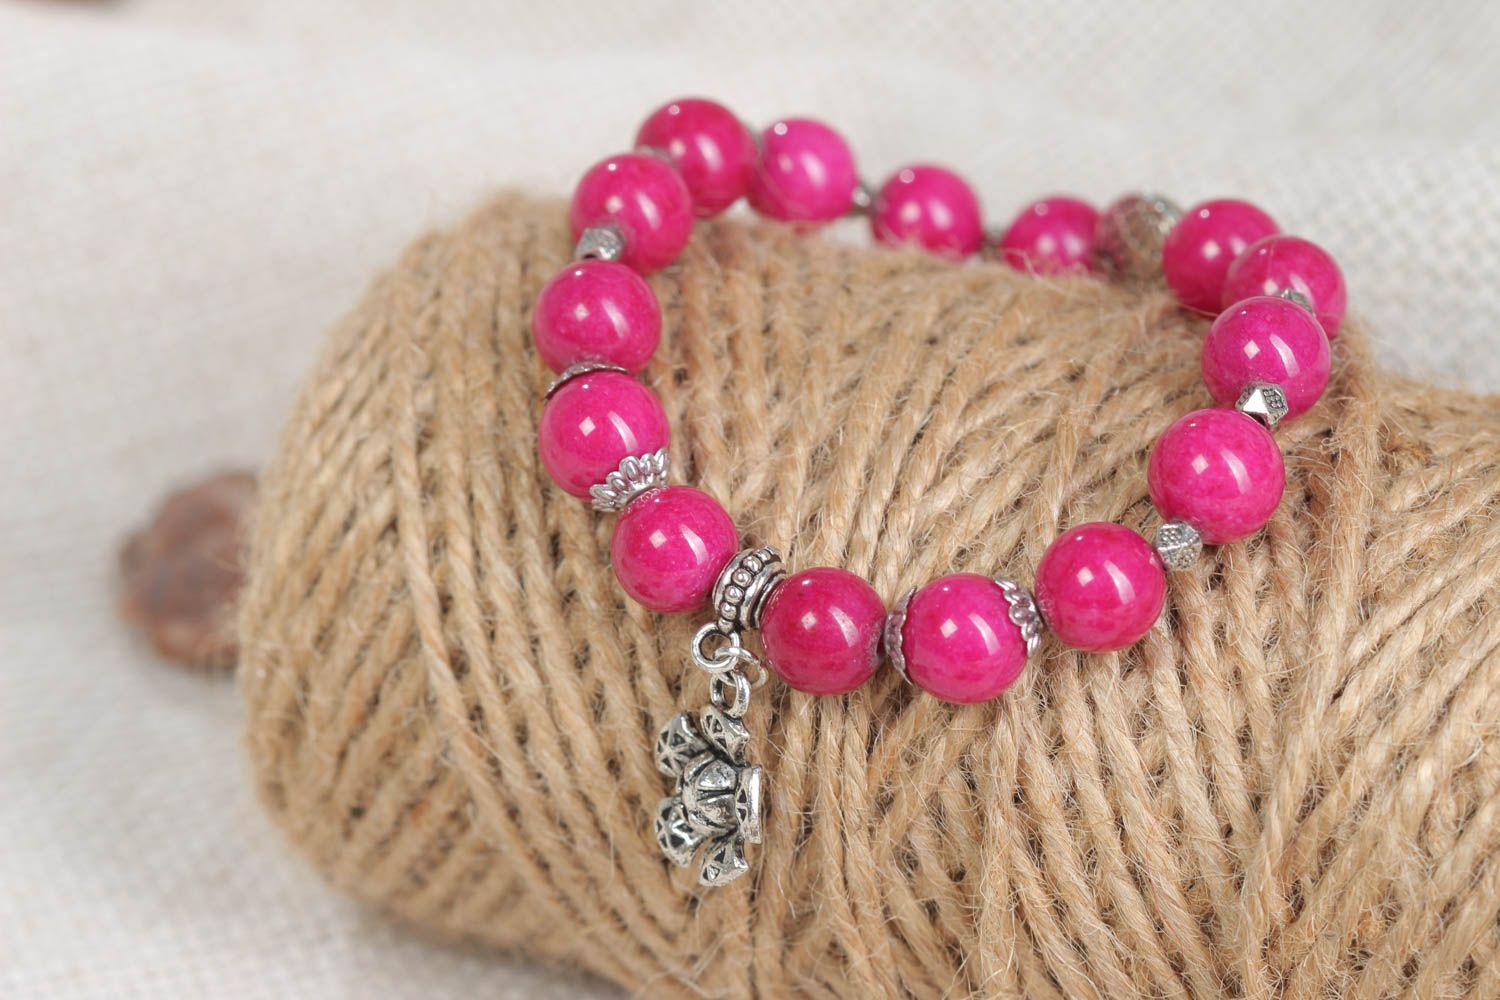 Handmade bracelet with charms stylish bright accessory cute pink jewelry photo 1